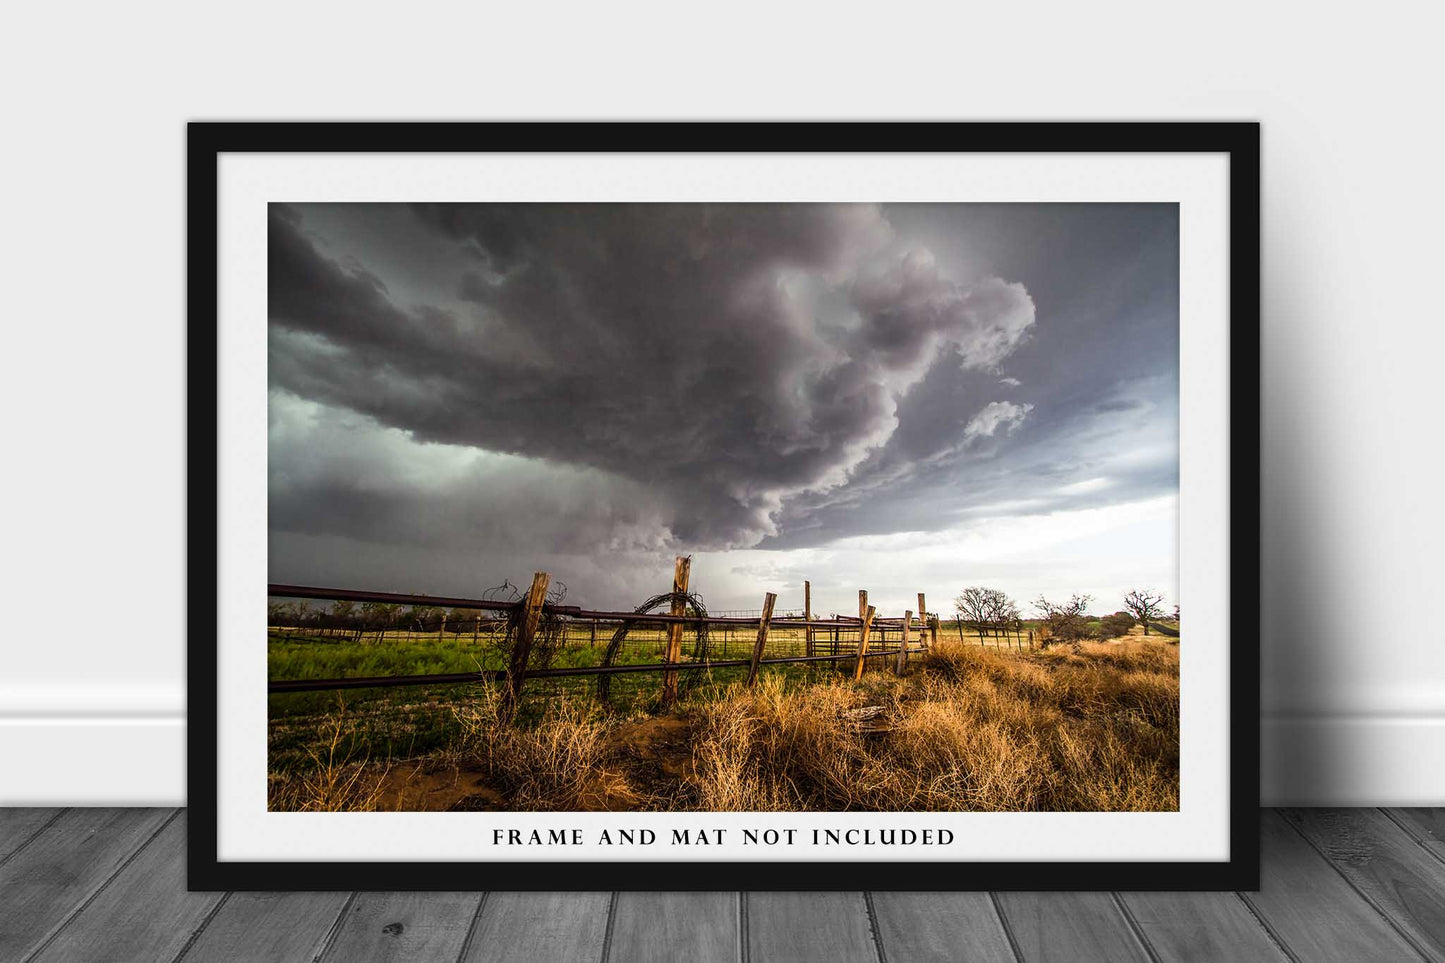 Storm Photography Print (Not Framed) Picture of Thunderstorm Over Barbed Wire Fence on Stormy Day in Oklahoma Farm and Ranch Wall Art Western Decor